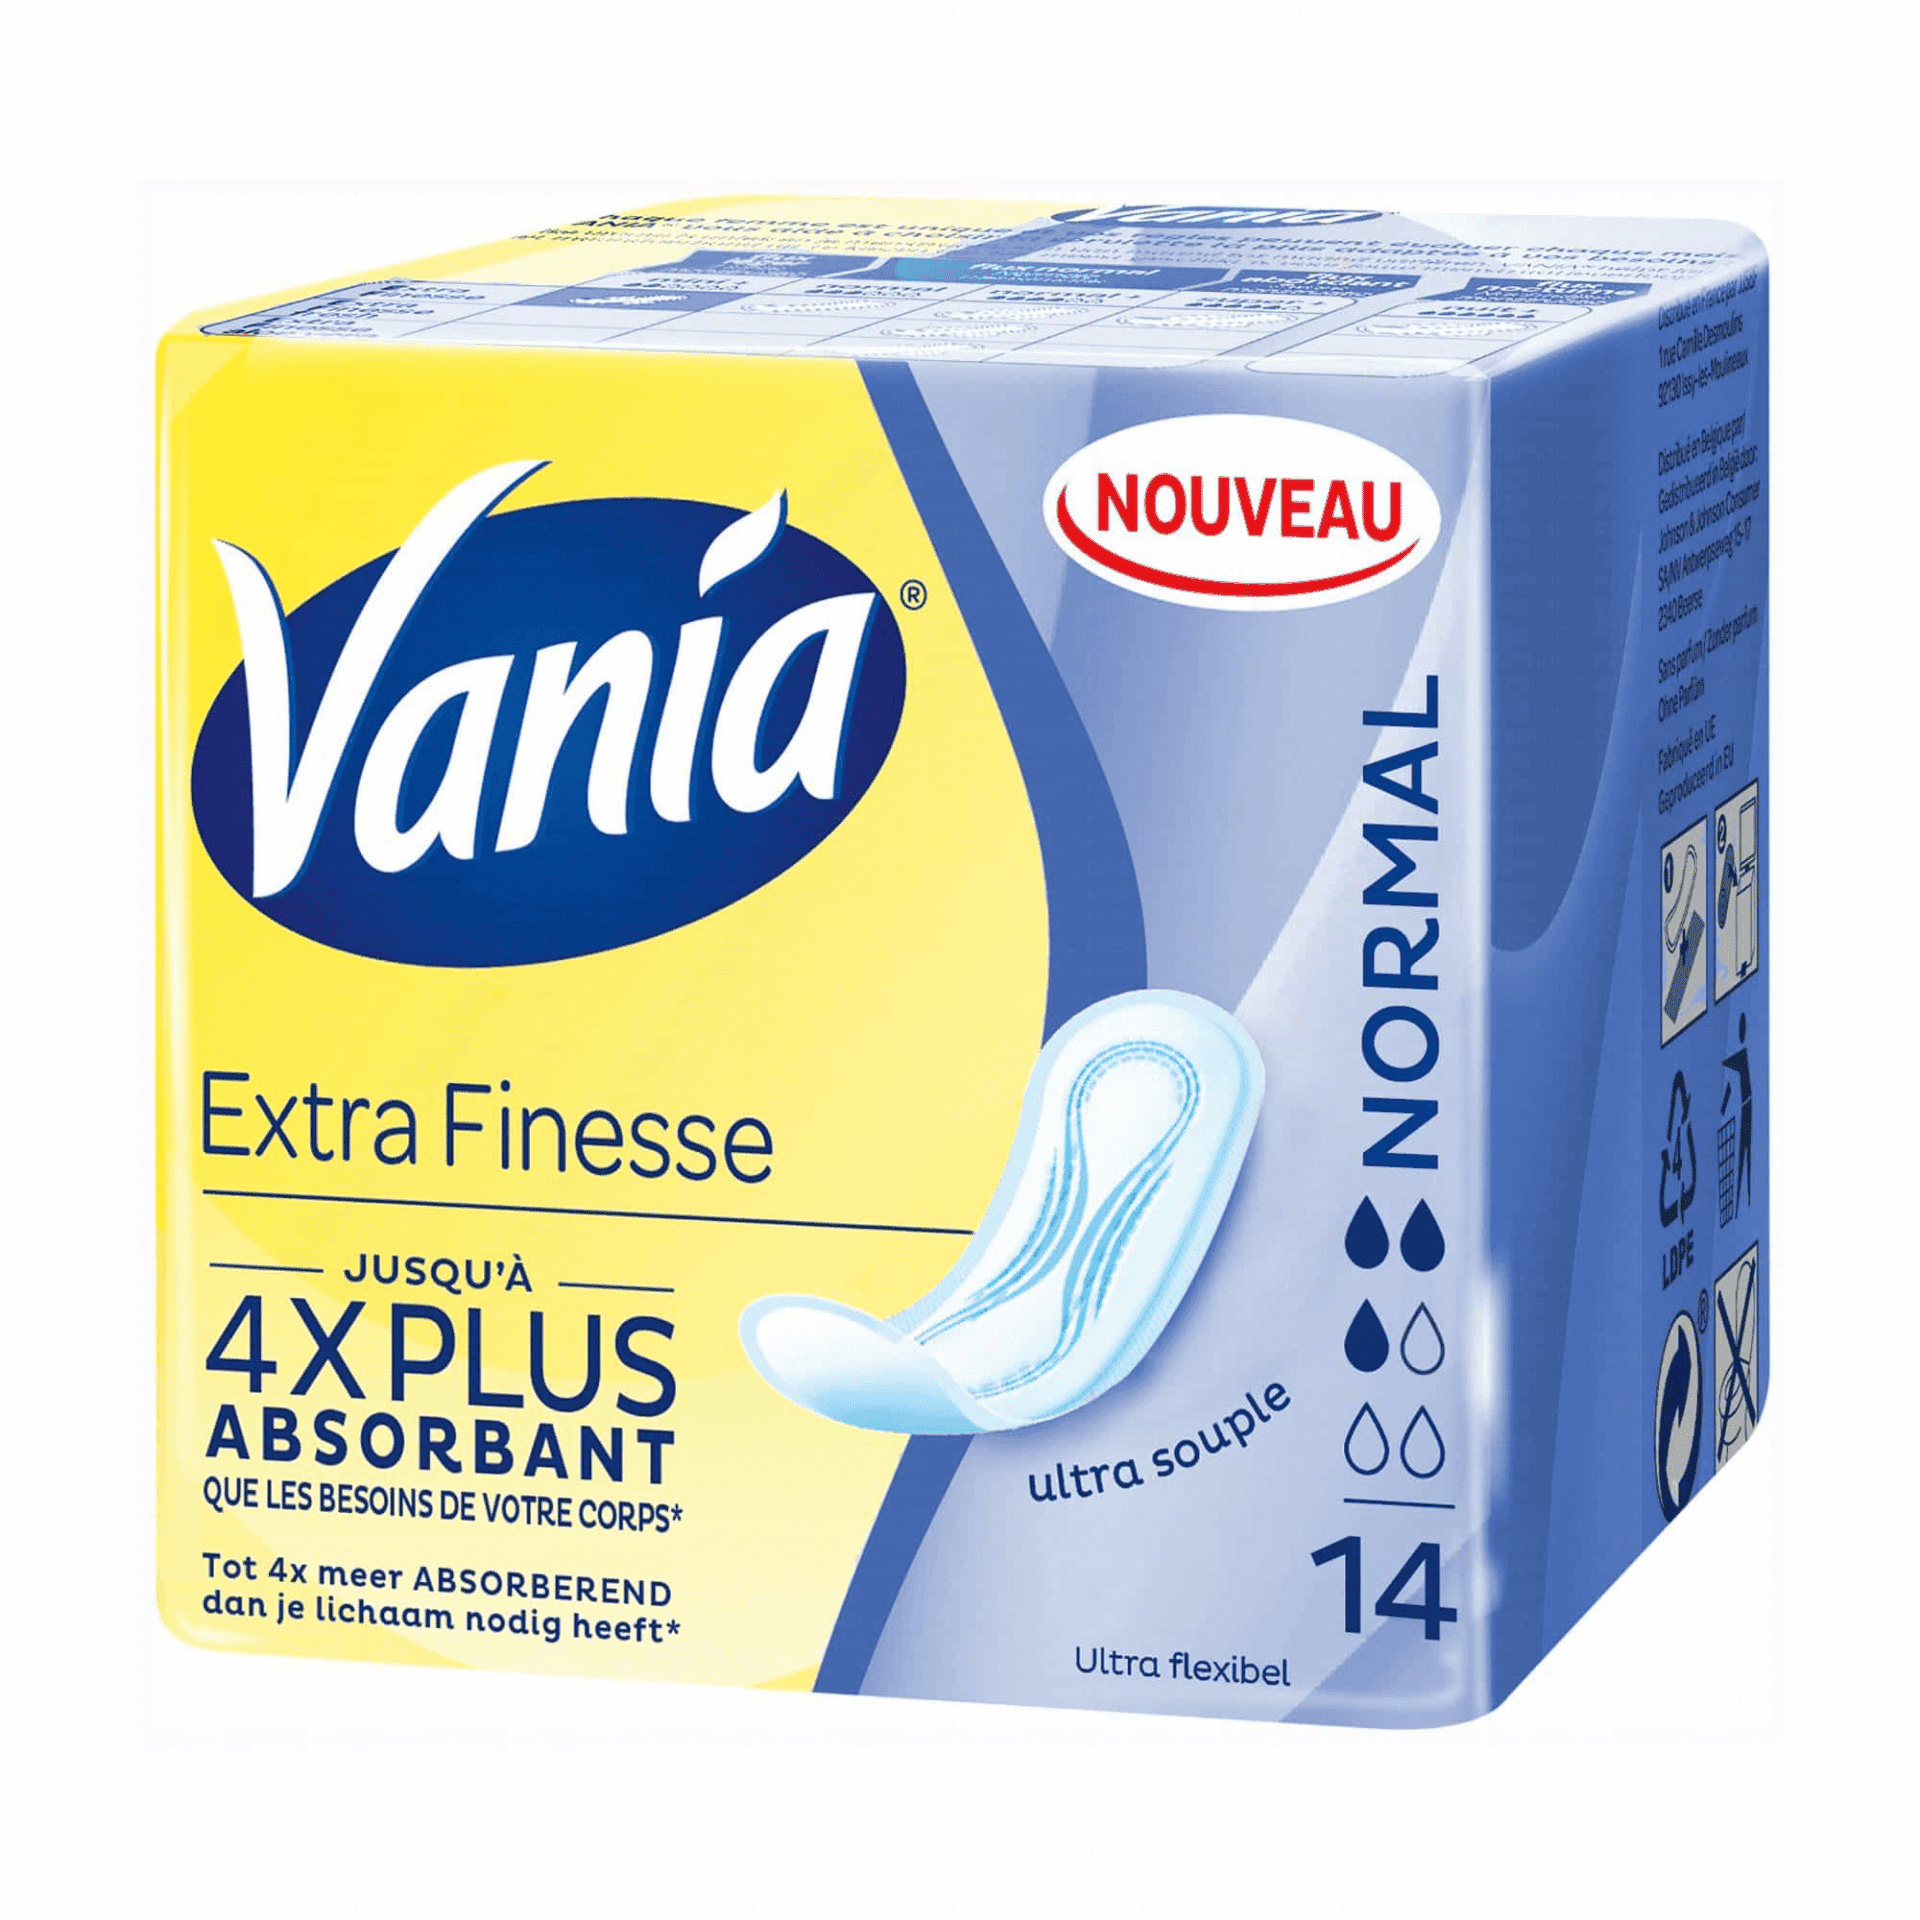 Vania Extra Finesse Normale 14 pièces